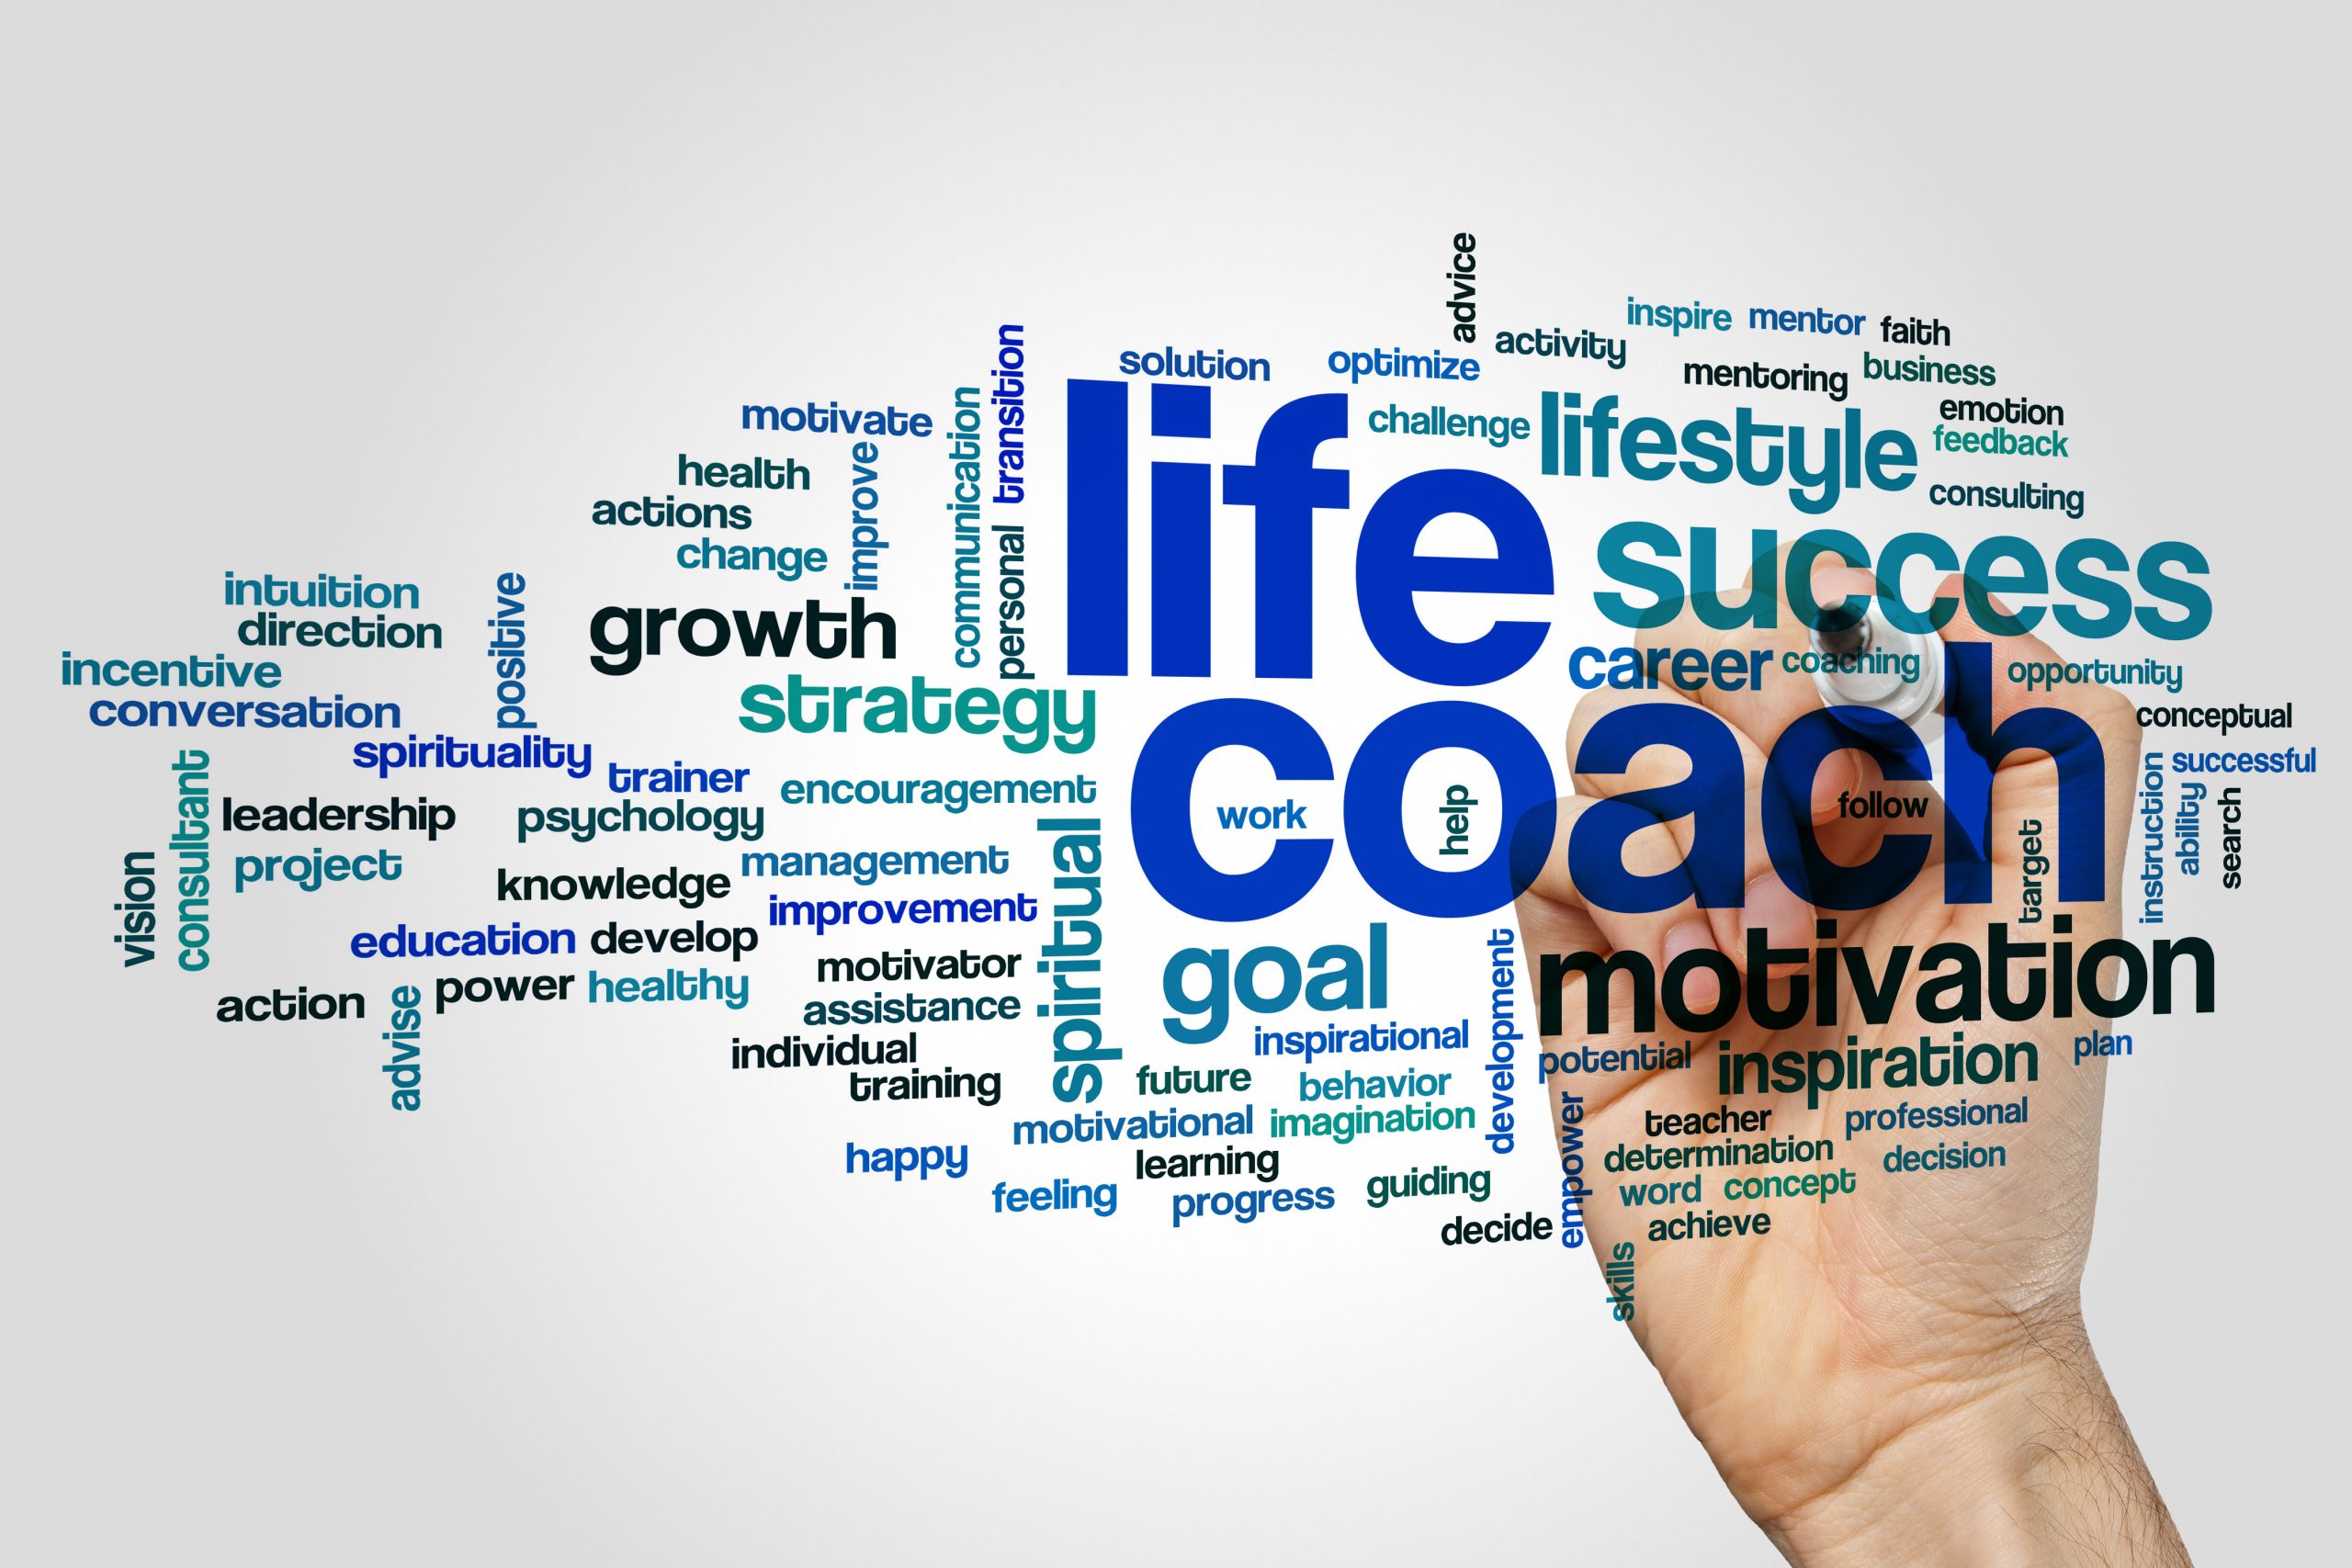 Millionaire Life Coaching is proud to provide you with exclusive coaching from one of Ireland’s finest.